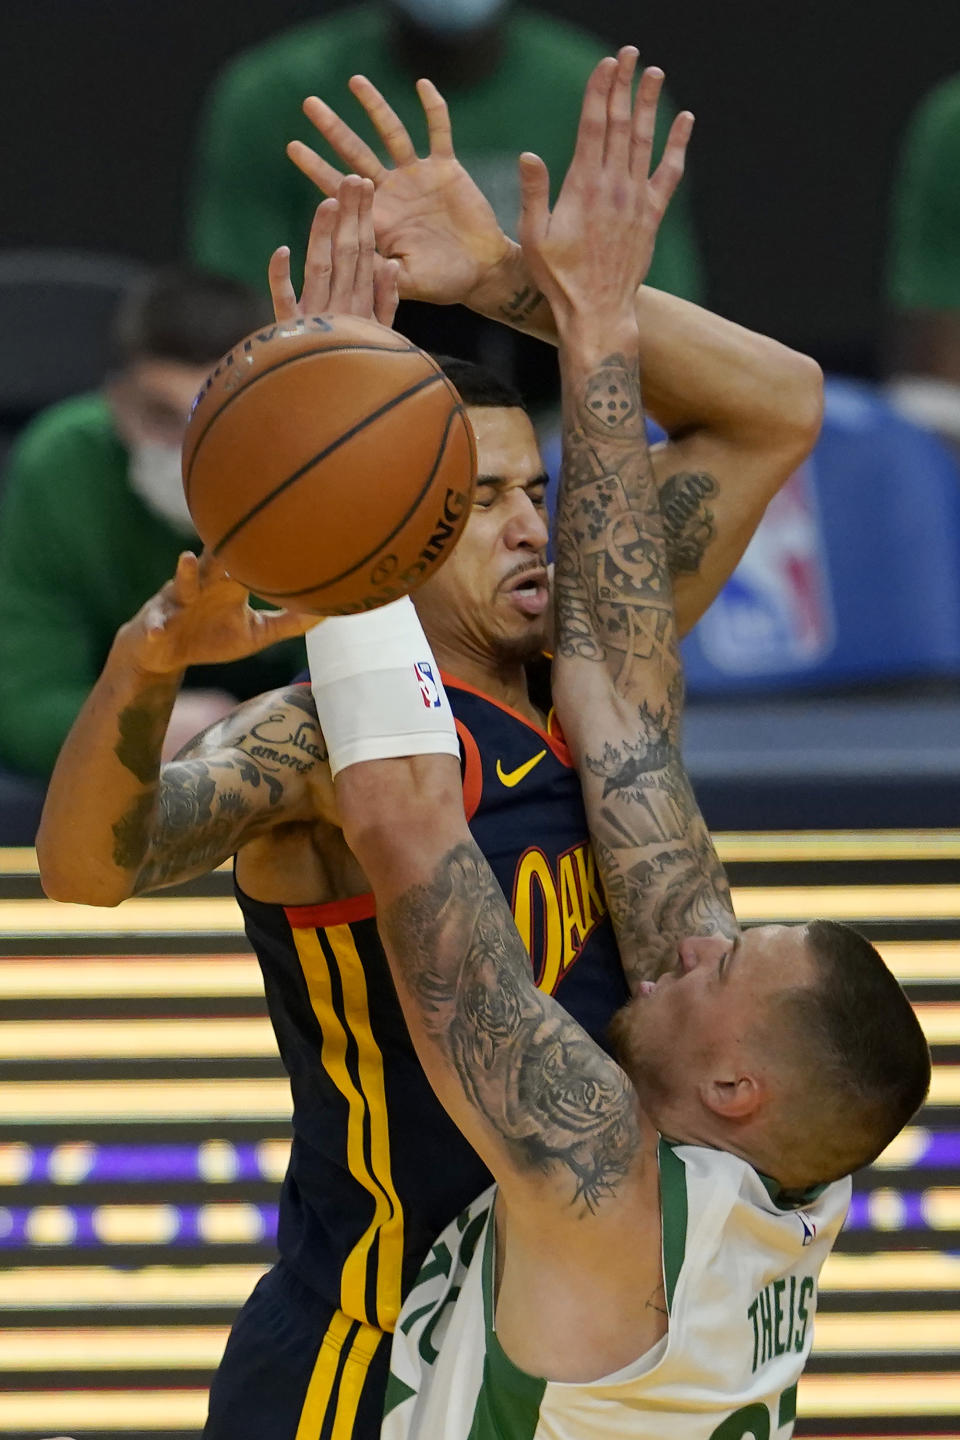 Golden State Warriors forward Juan Toscano-Anderson, top, passes the ball while defended by Boston Celtics center Daniel Theis during the first half of an NBA basketball game in San Francisco, Tuesday, Feb. 2, 2021. (AP Photo/Jeff Chiu)